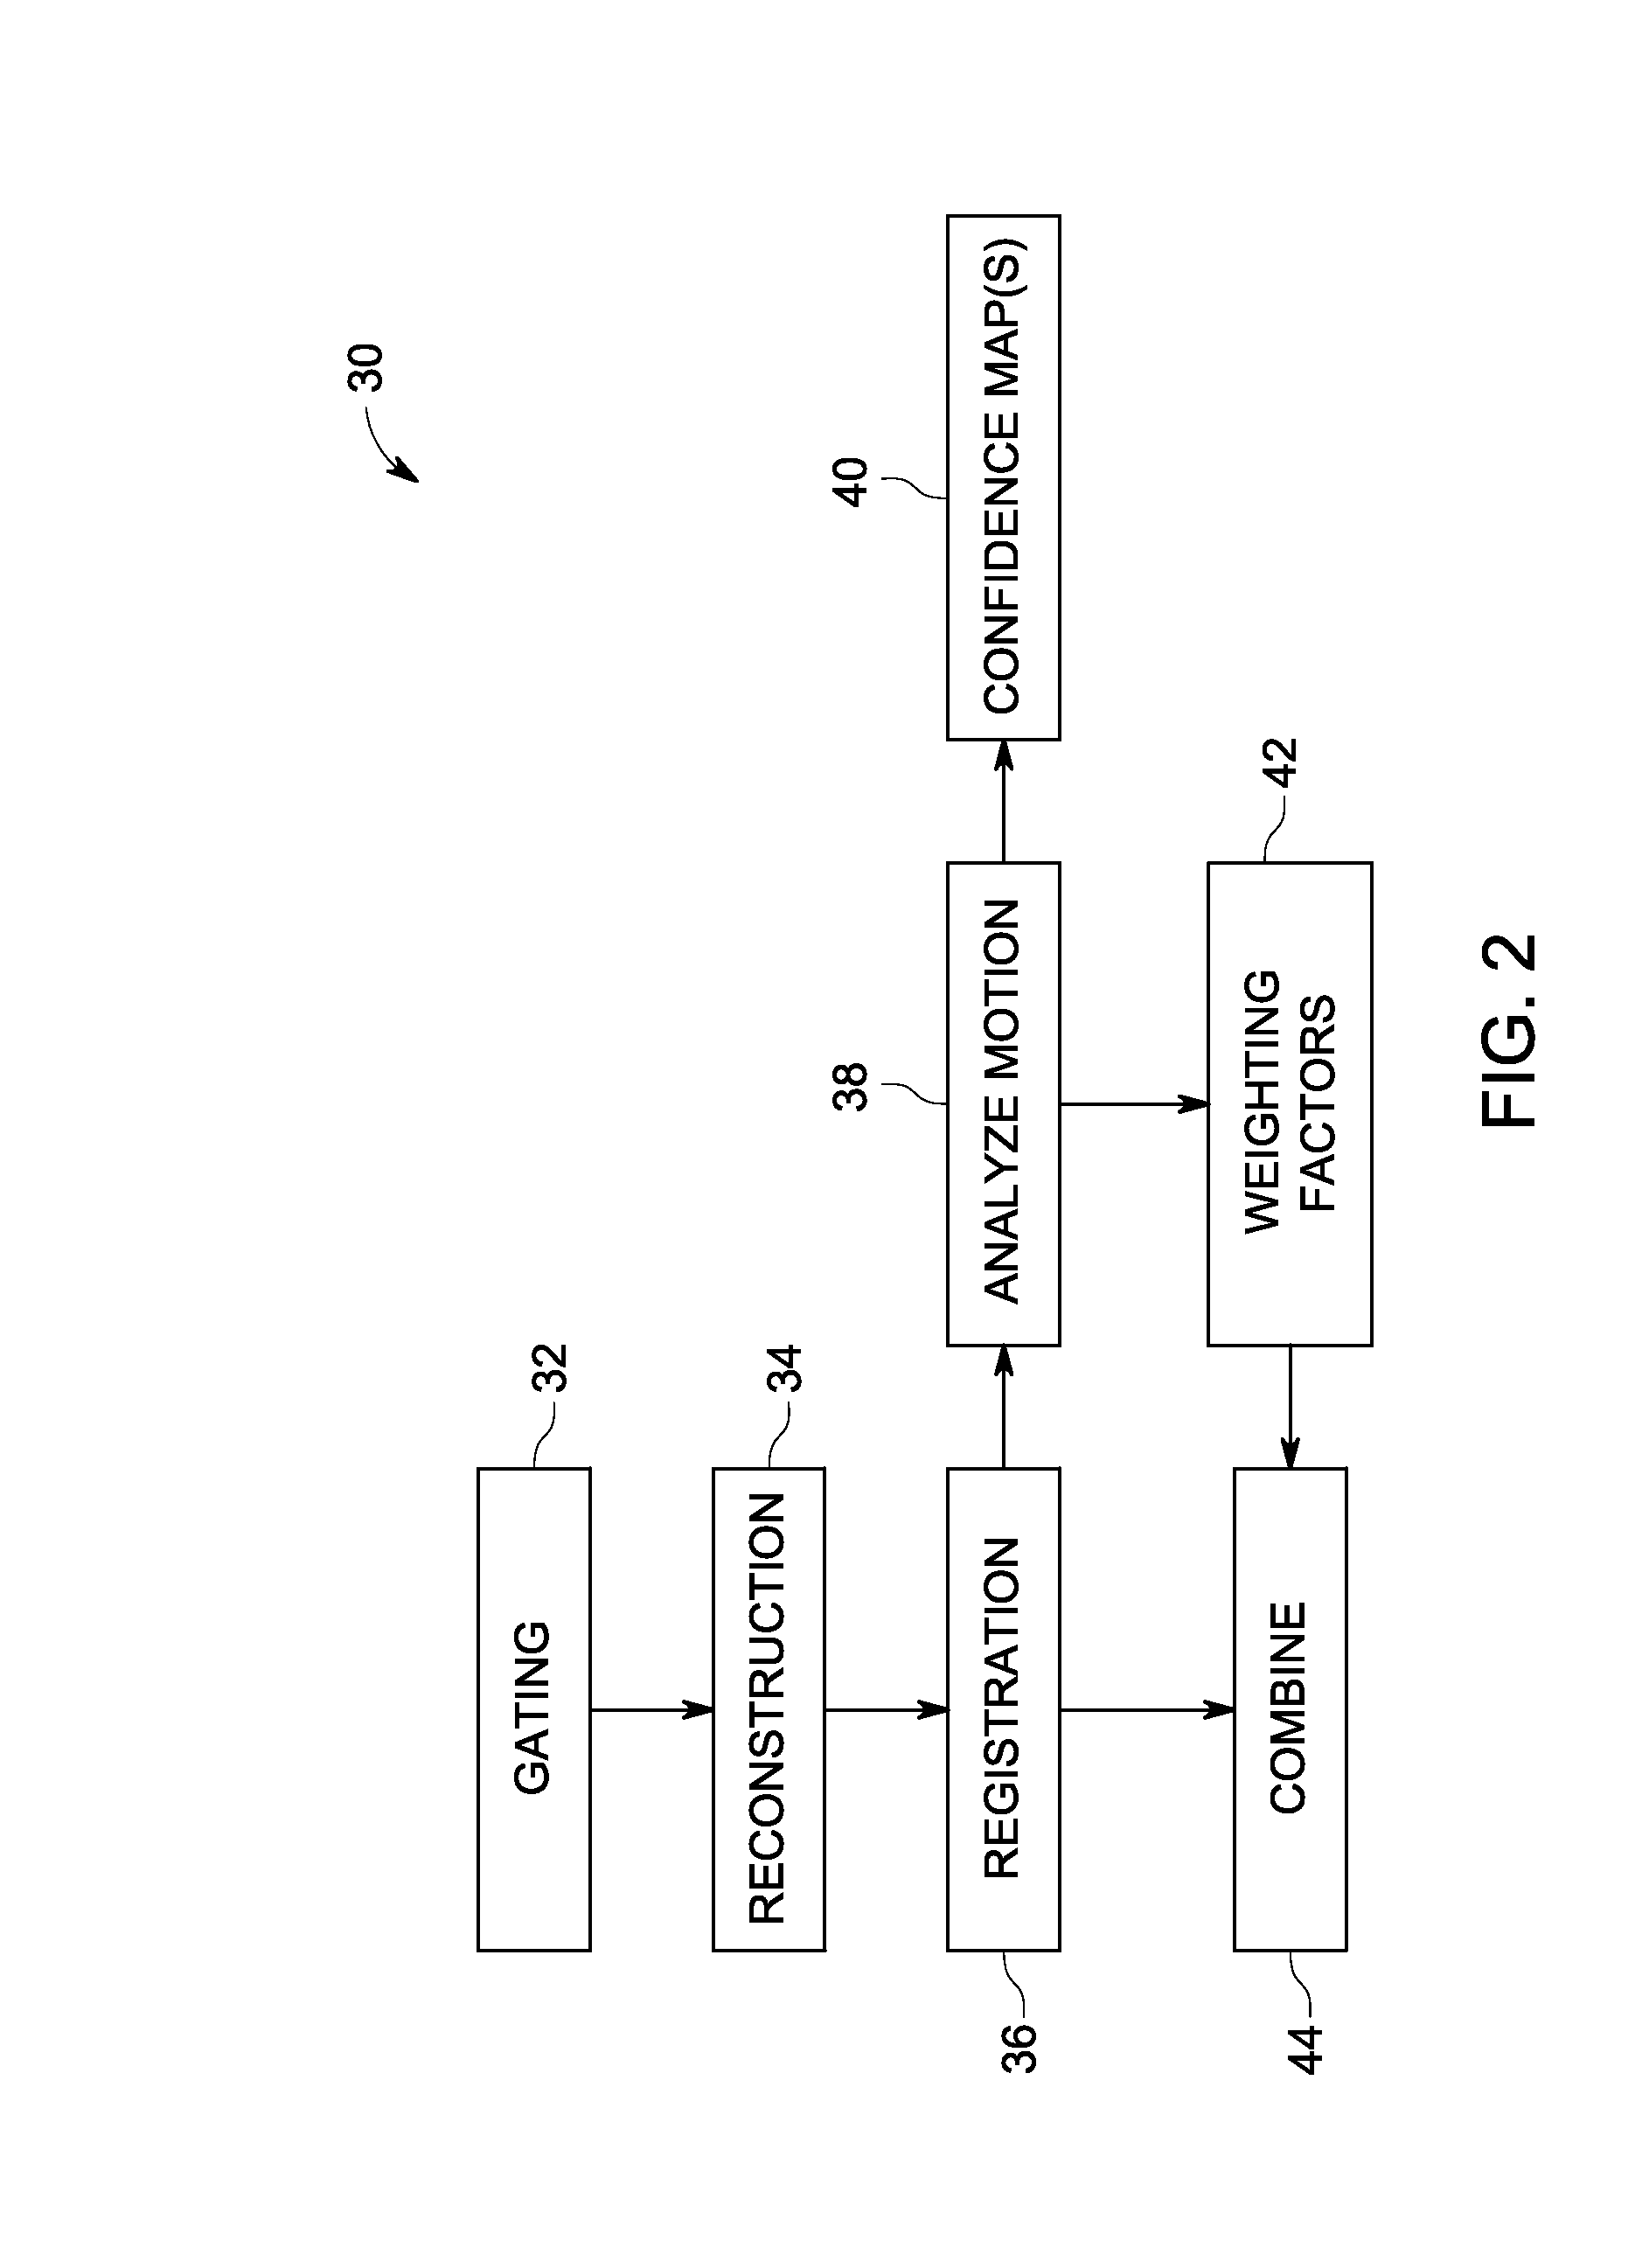 Motion compensation in image processing